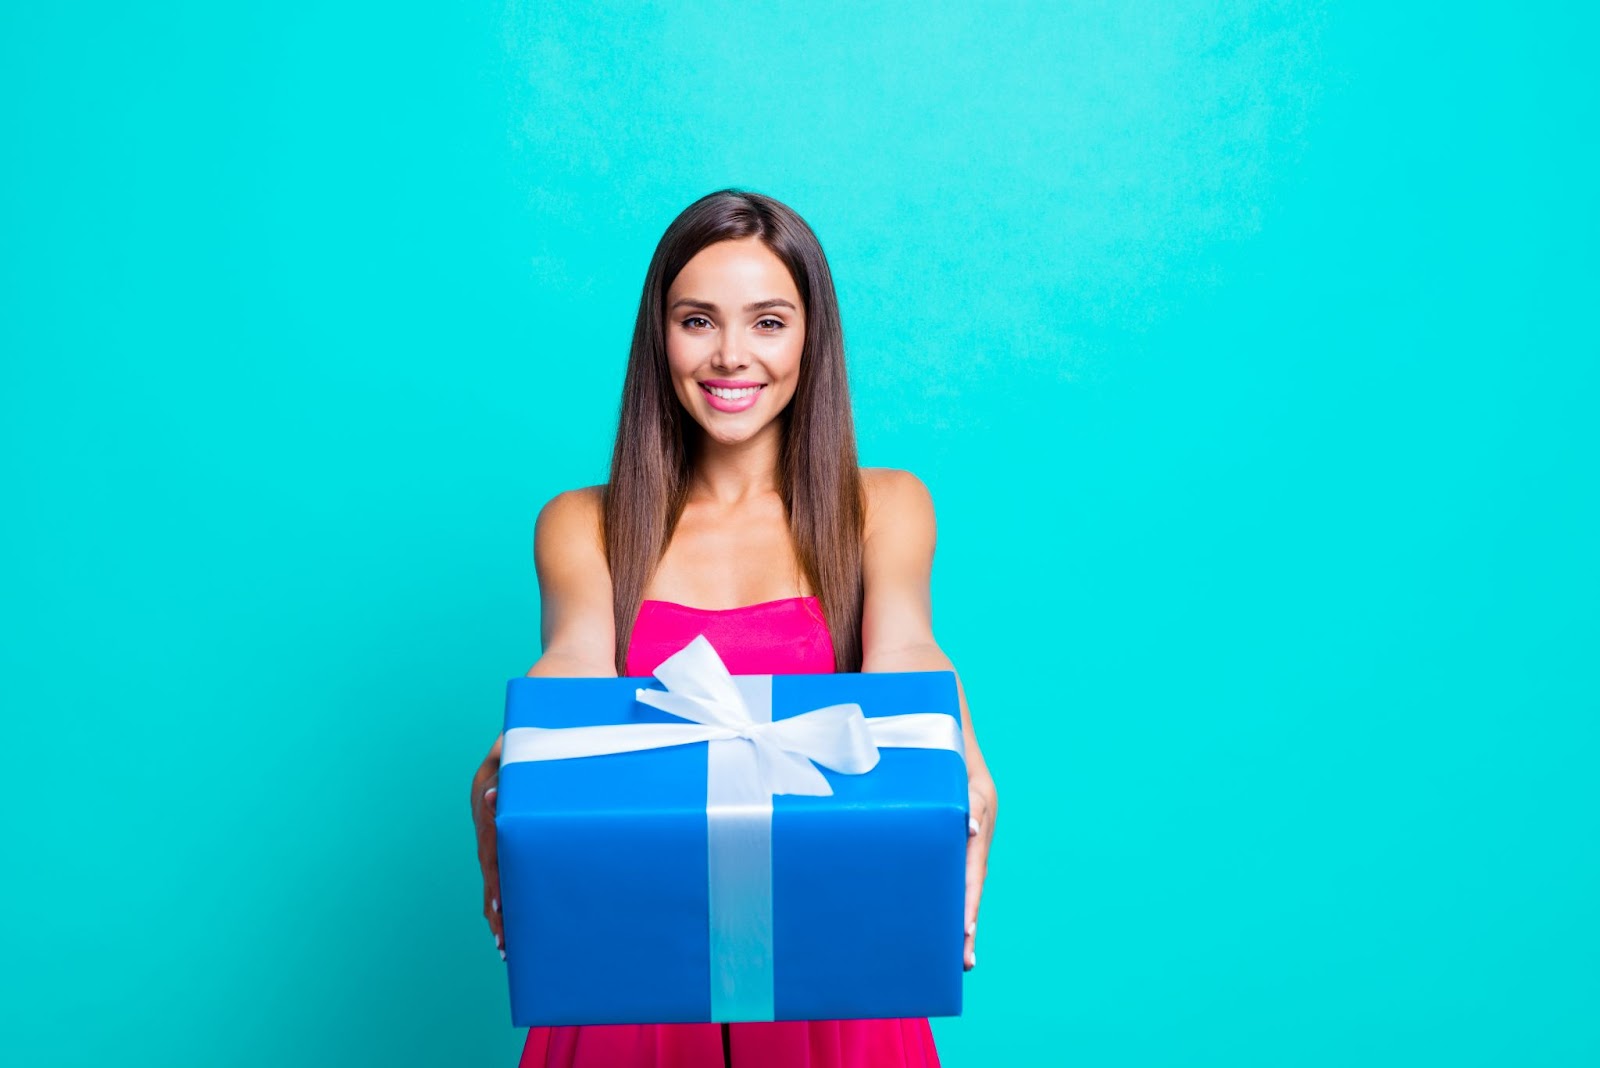 A woman holding out a gift-wrapped box.